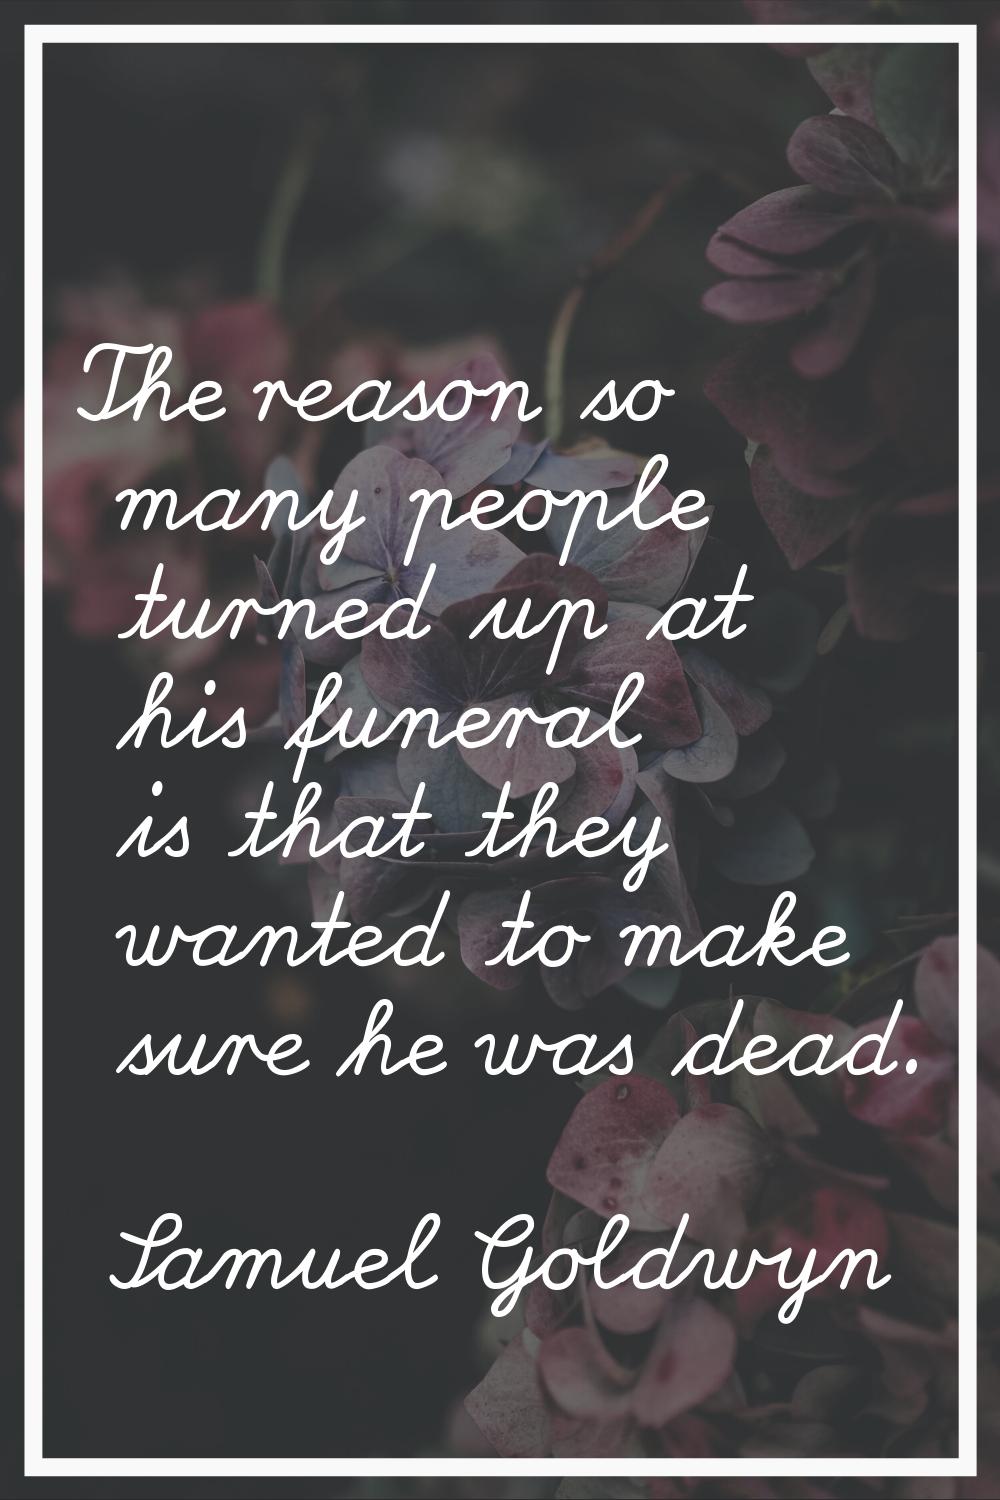 The reason so many people turned up at his funeral is that they wanted to make sure he was dead.